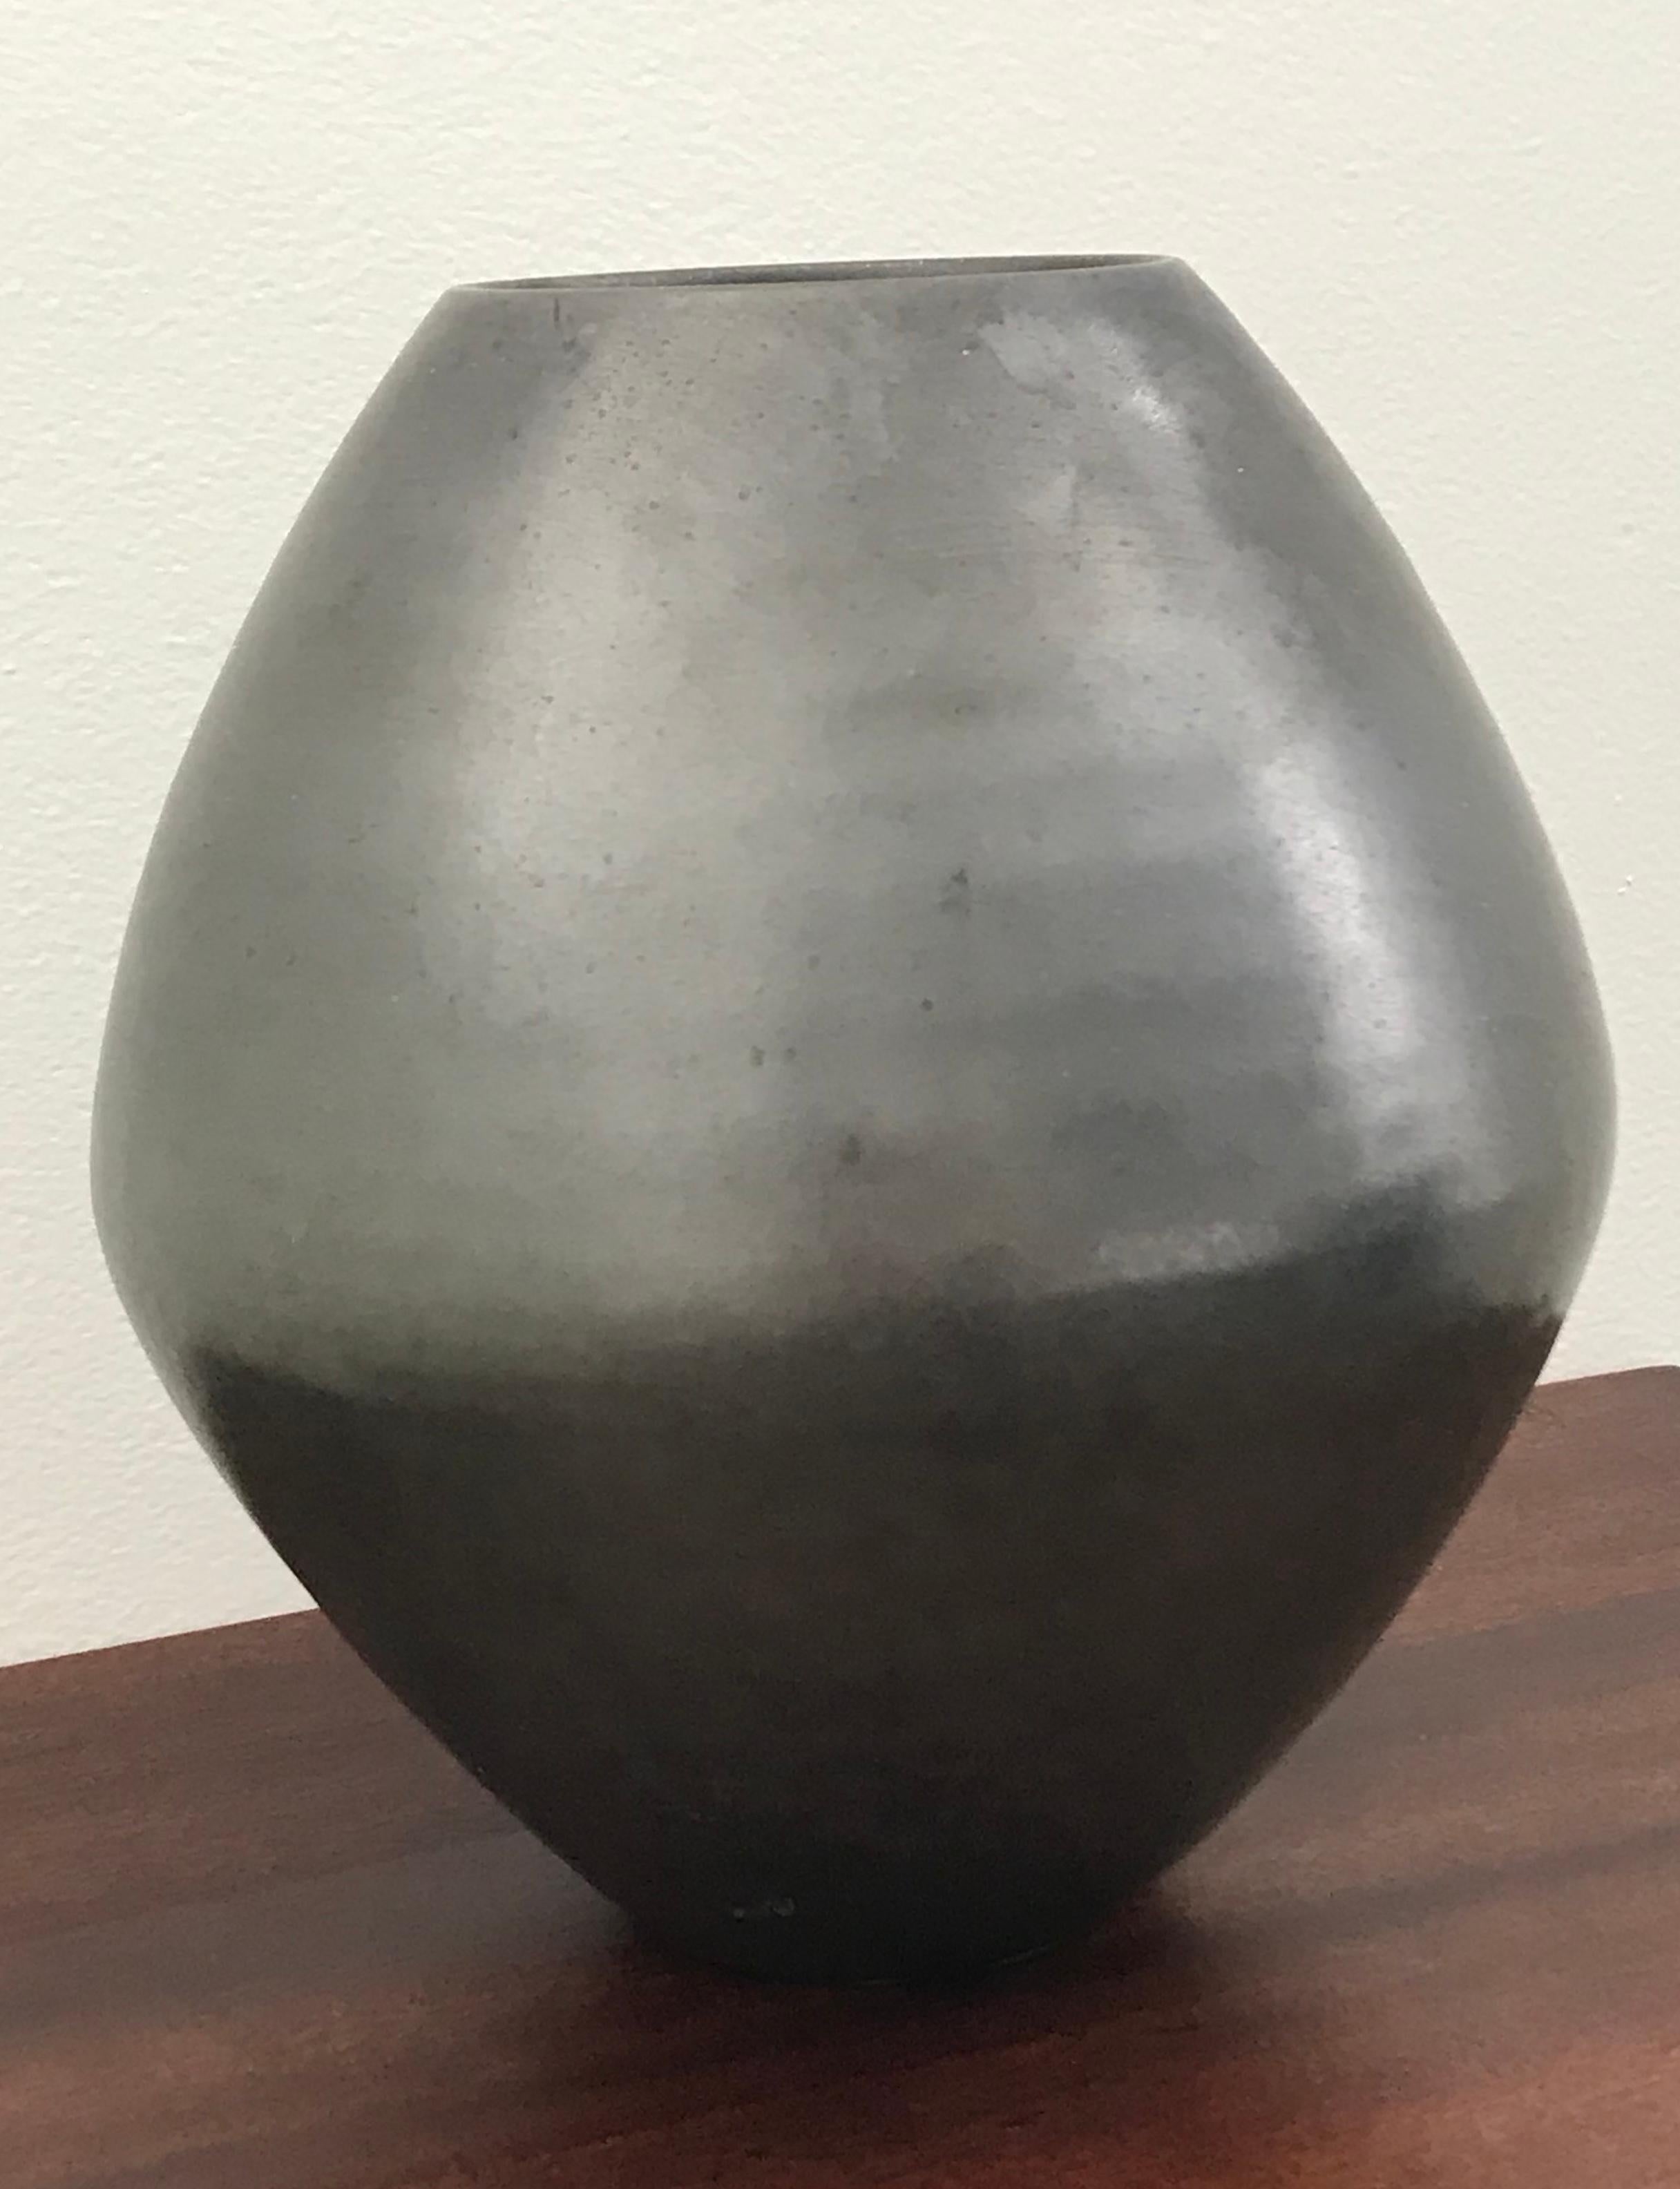 Iridescent glazed ceramic vase in steel gray by Mobach, Netherlands. The Mobach family has been producing kiln fired ceramics for over five generations.